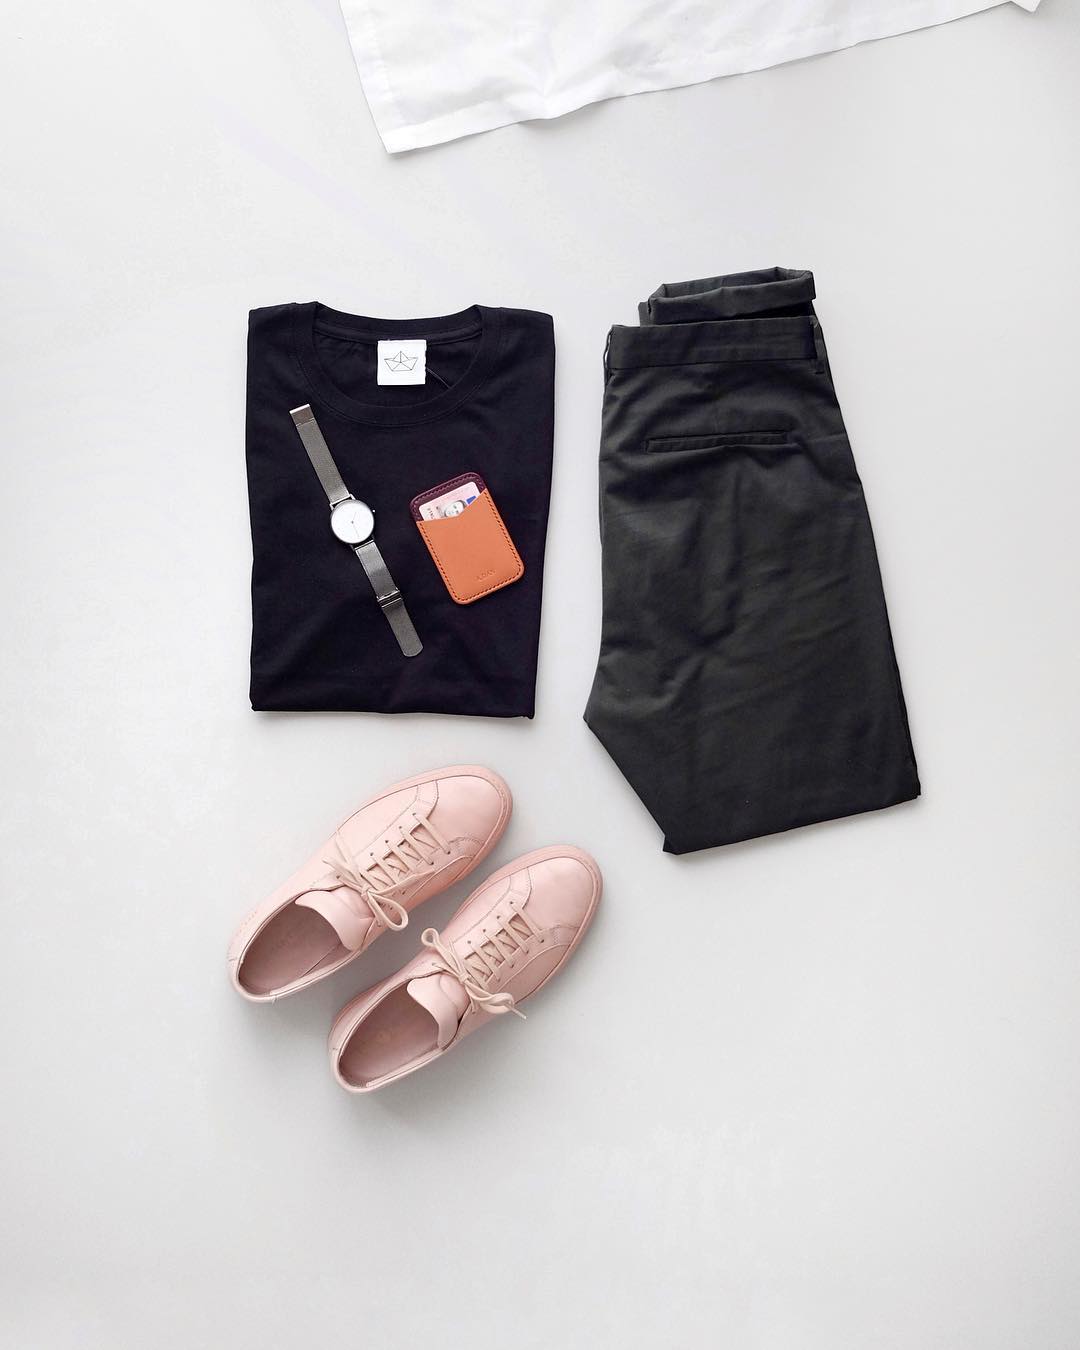 Love wearing black t-shirt? Then you are going to these amazing black t-shirt outfits we've curated for you today. #black #tshirt #mens #fashion #street #style